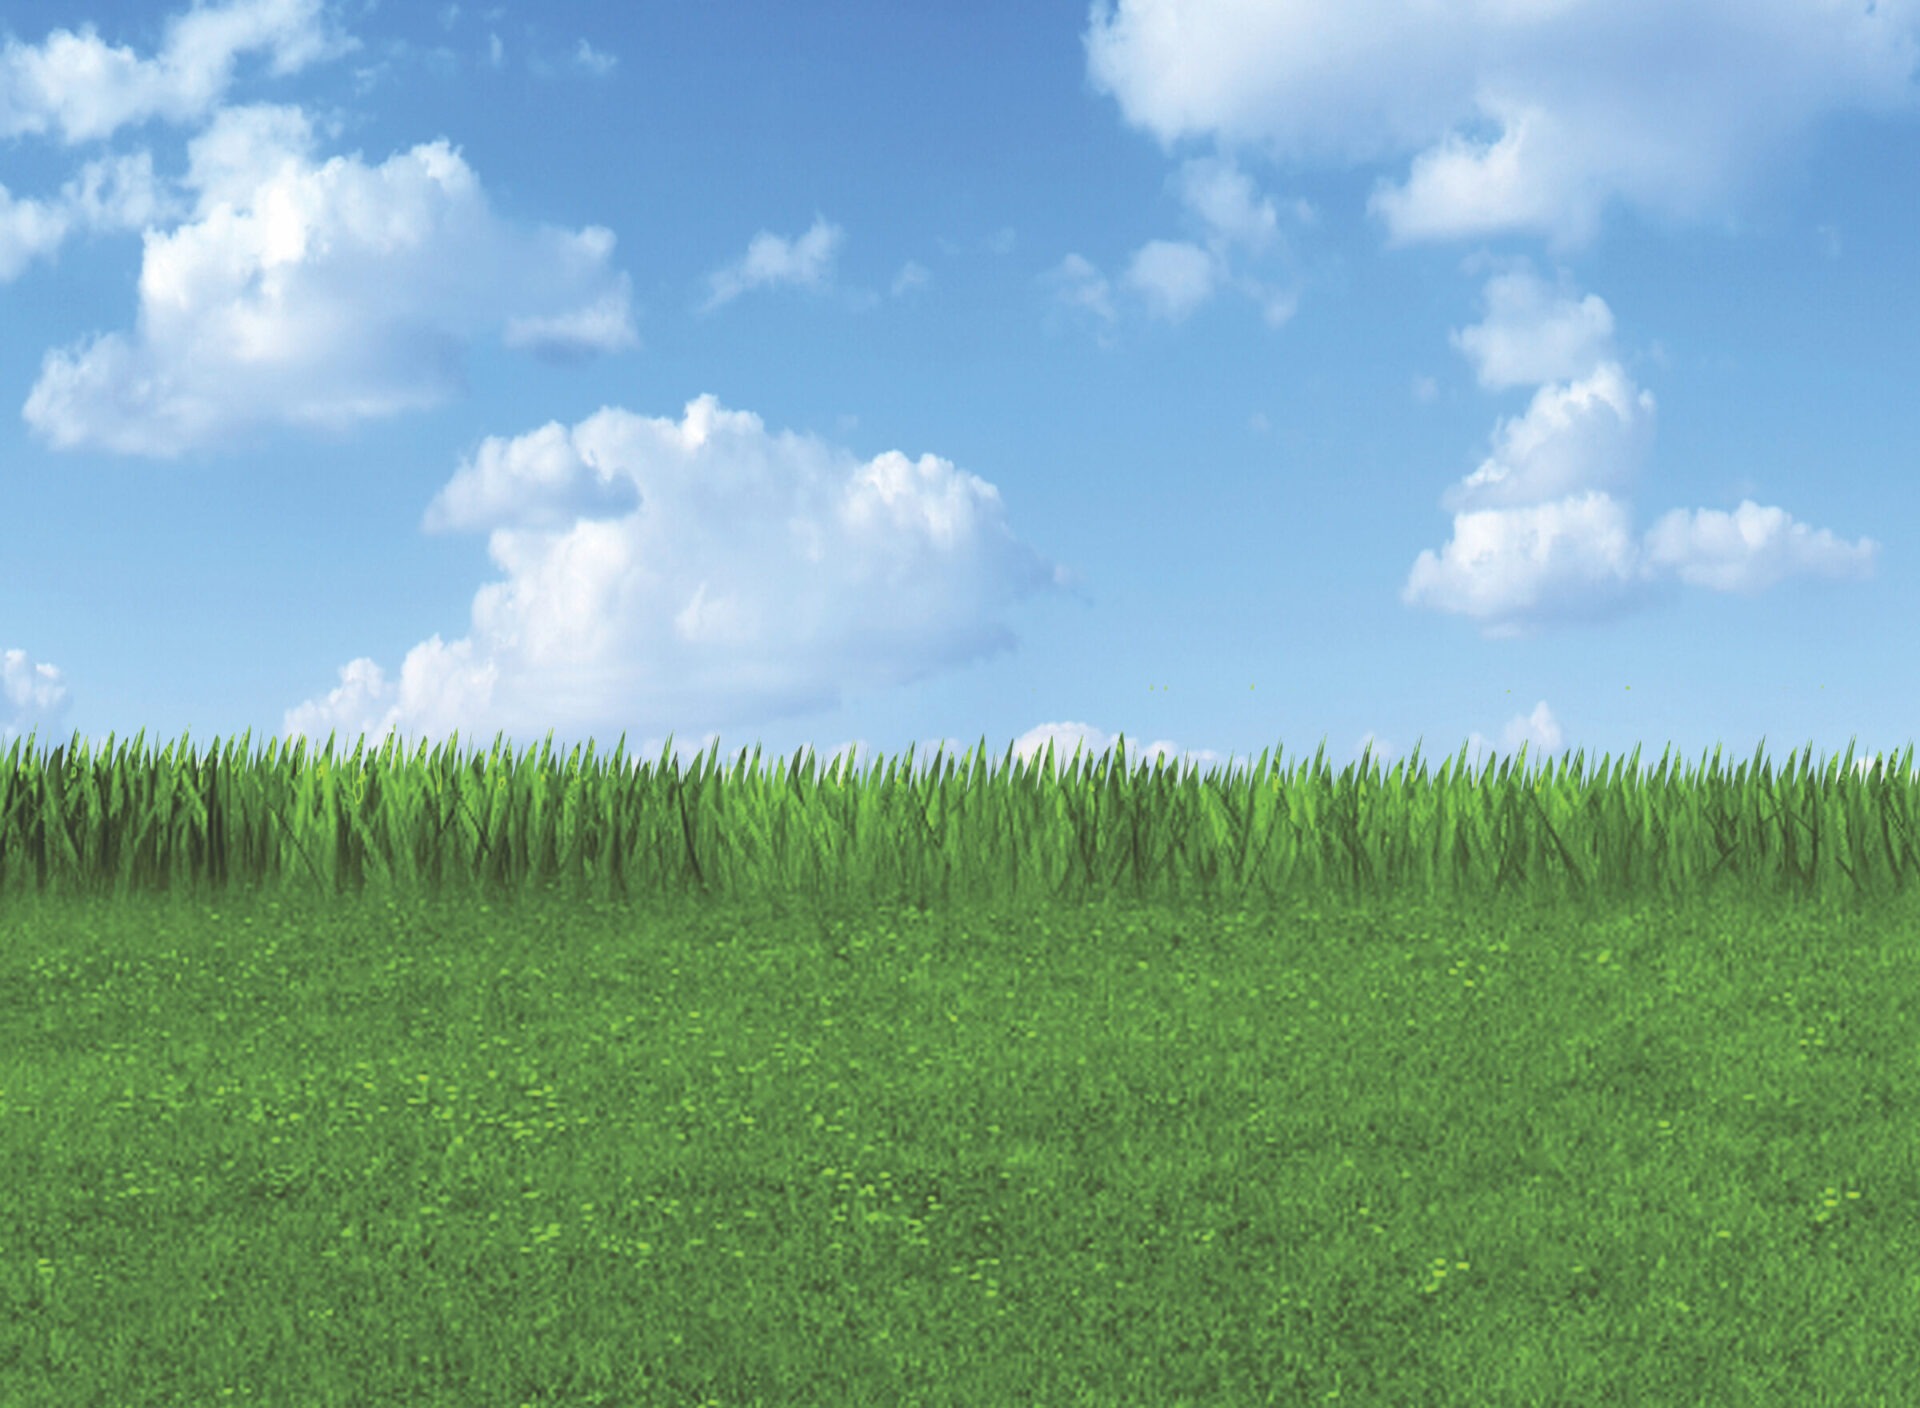 A tranquil scene with a lush green grassy field under a bright blue sky dotted with fluffy white clouds. No people or animals visible.